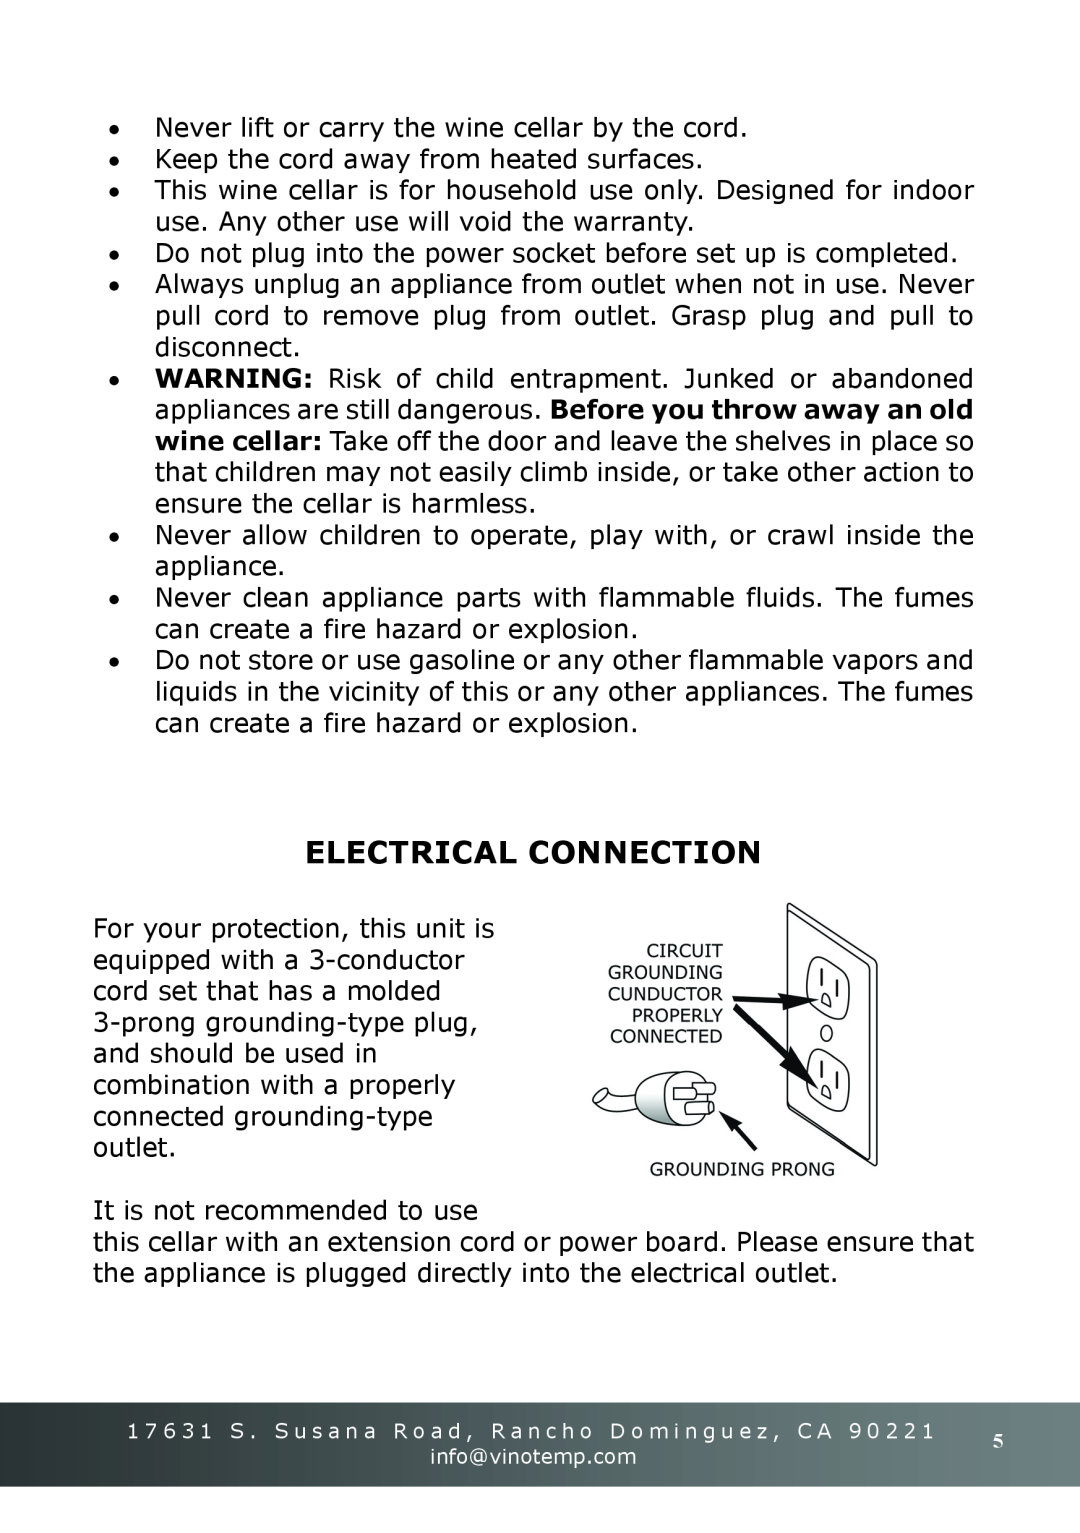 Vinotemp VT-18TEDS owner manual Electrical Connection 